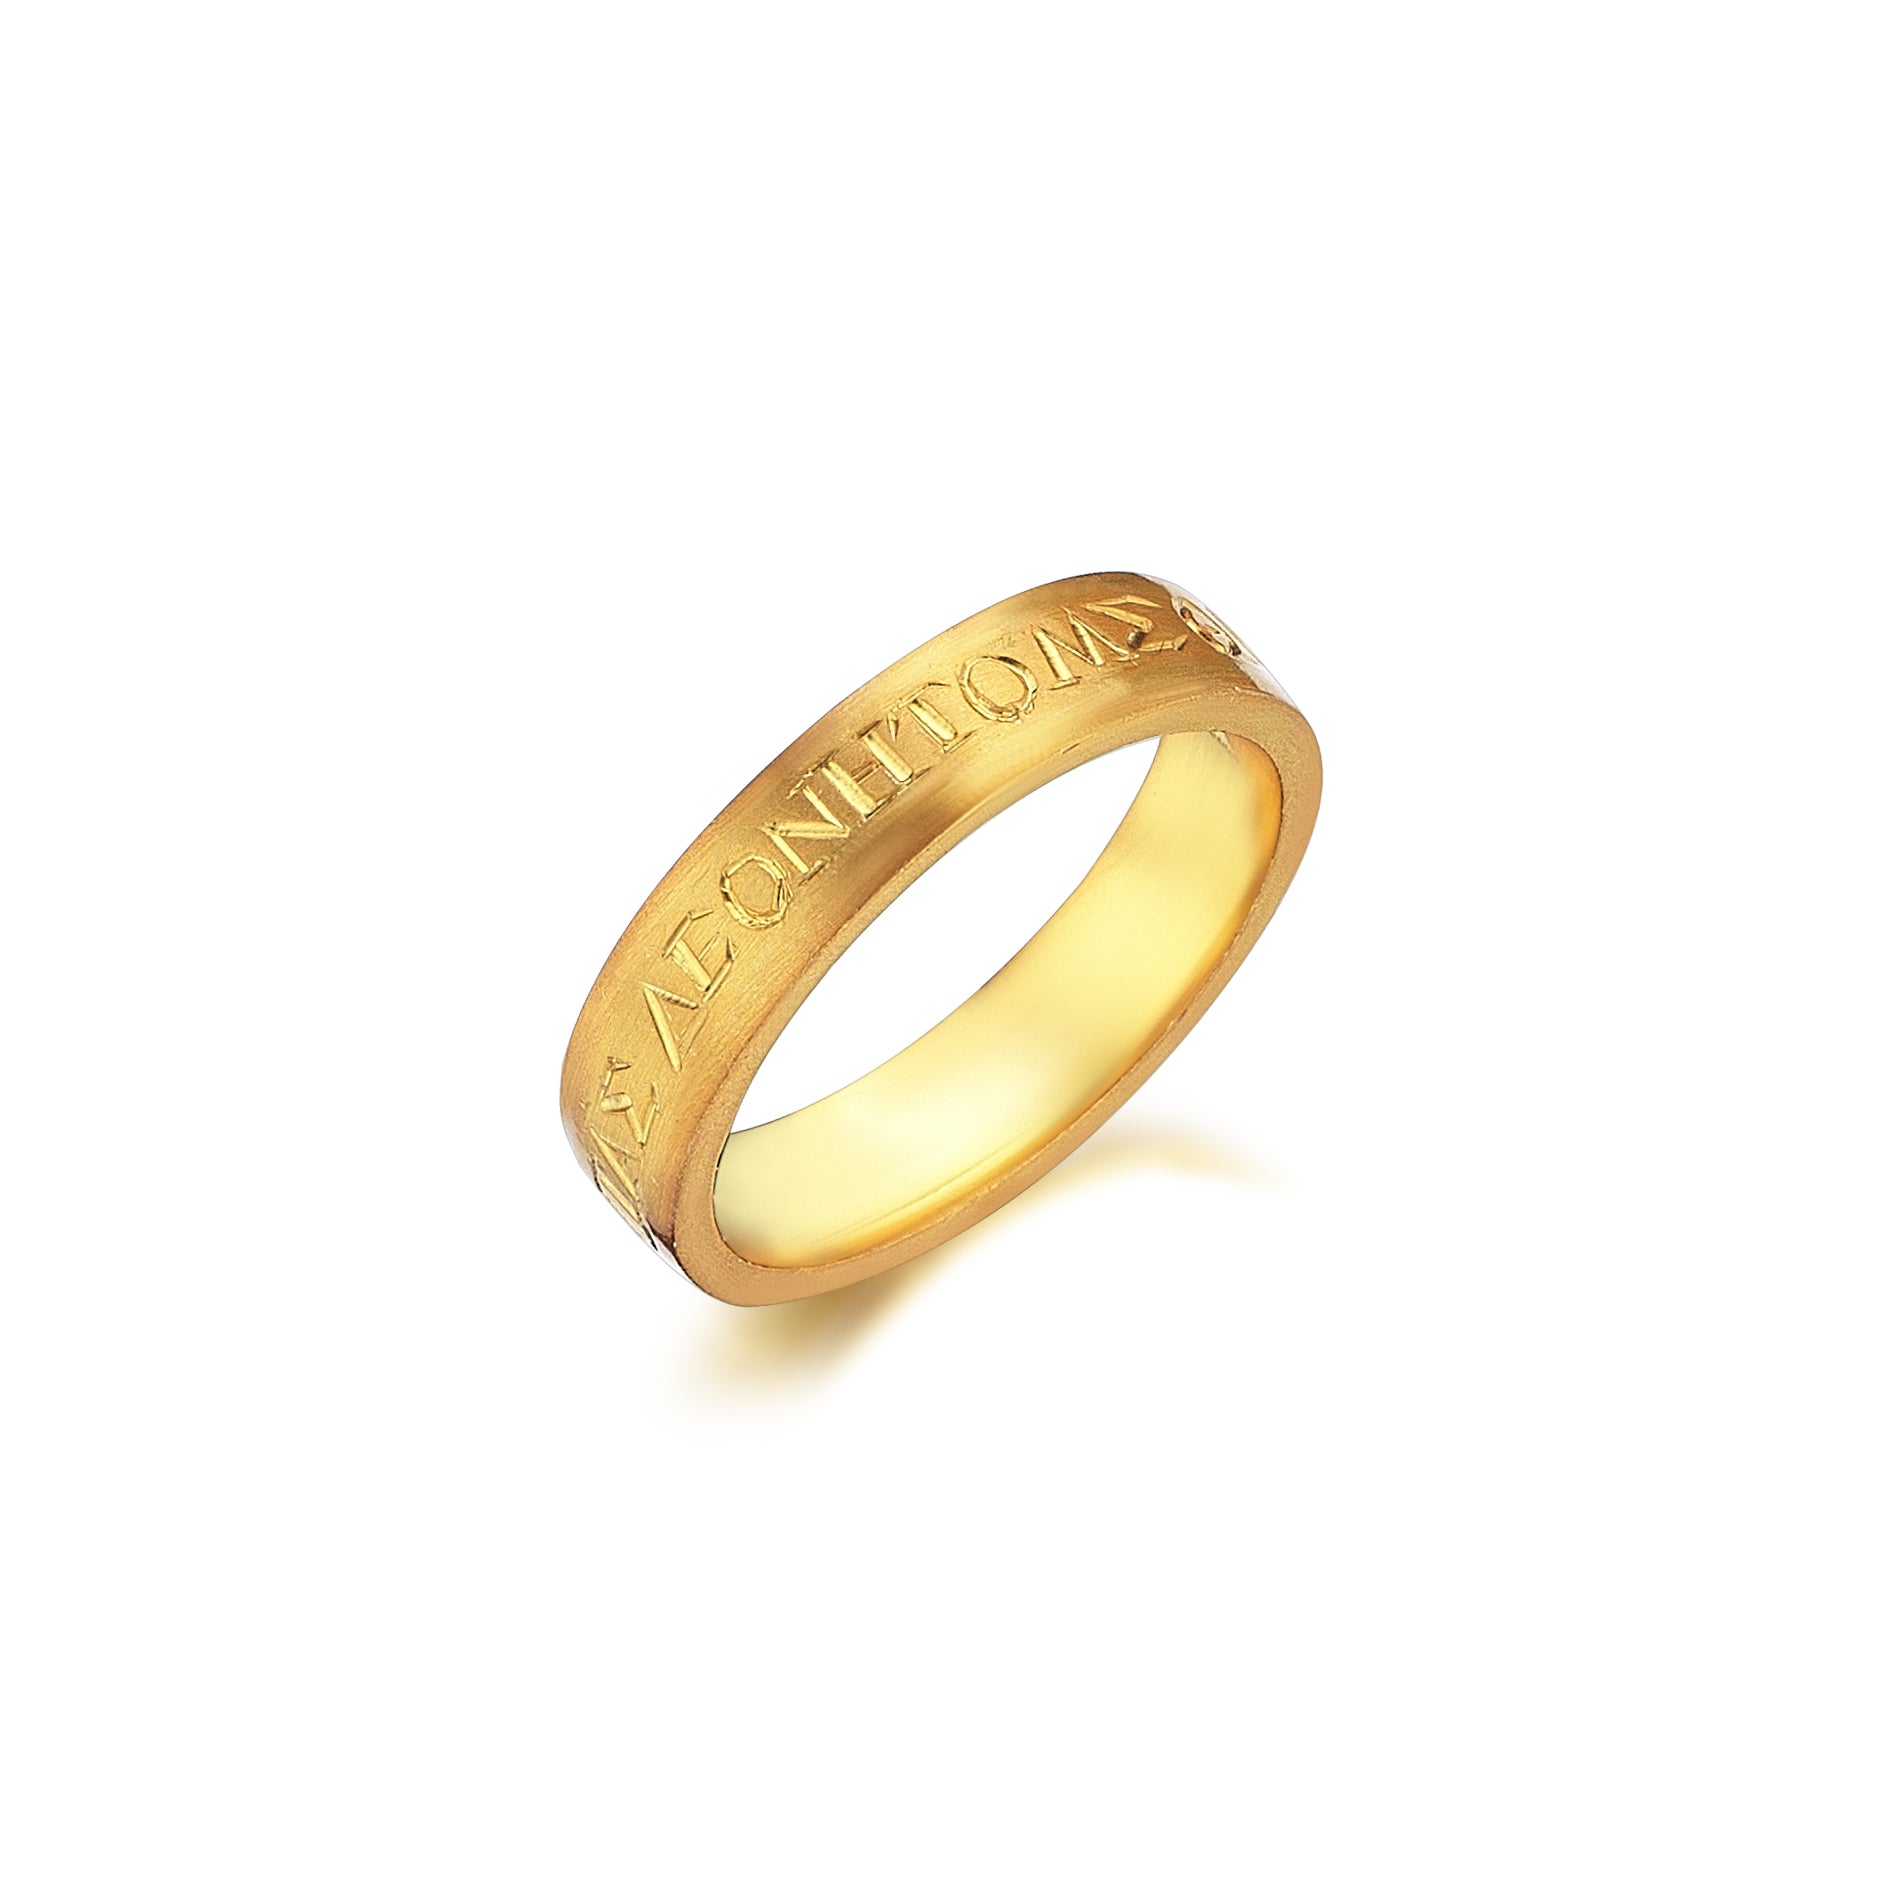 THE GRECIAN RING